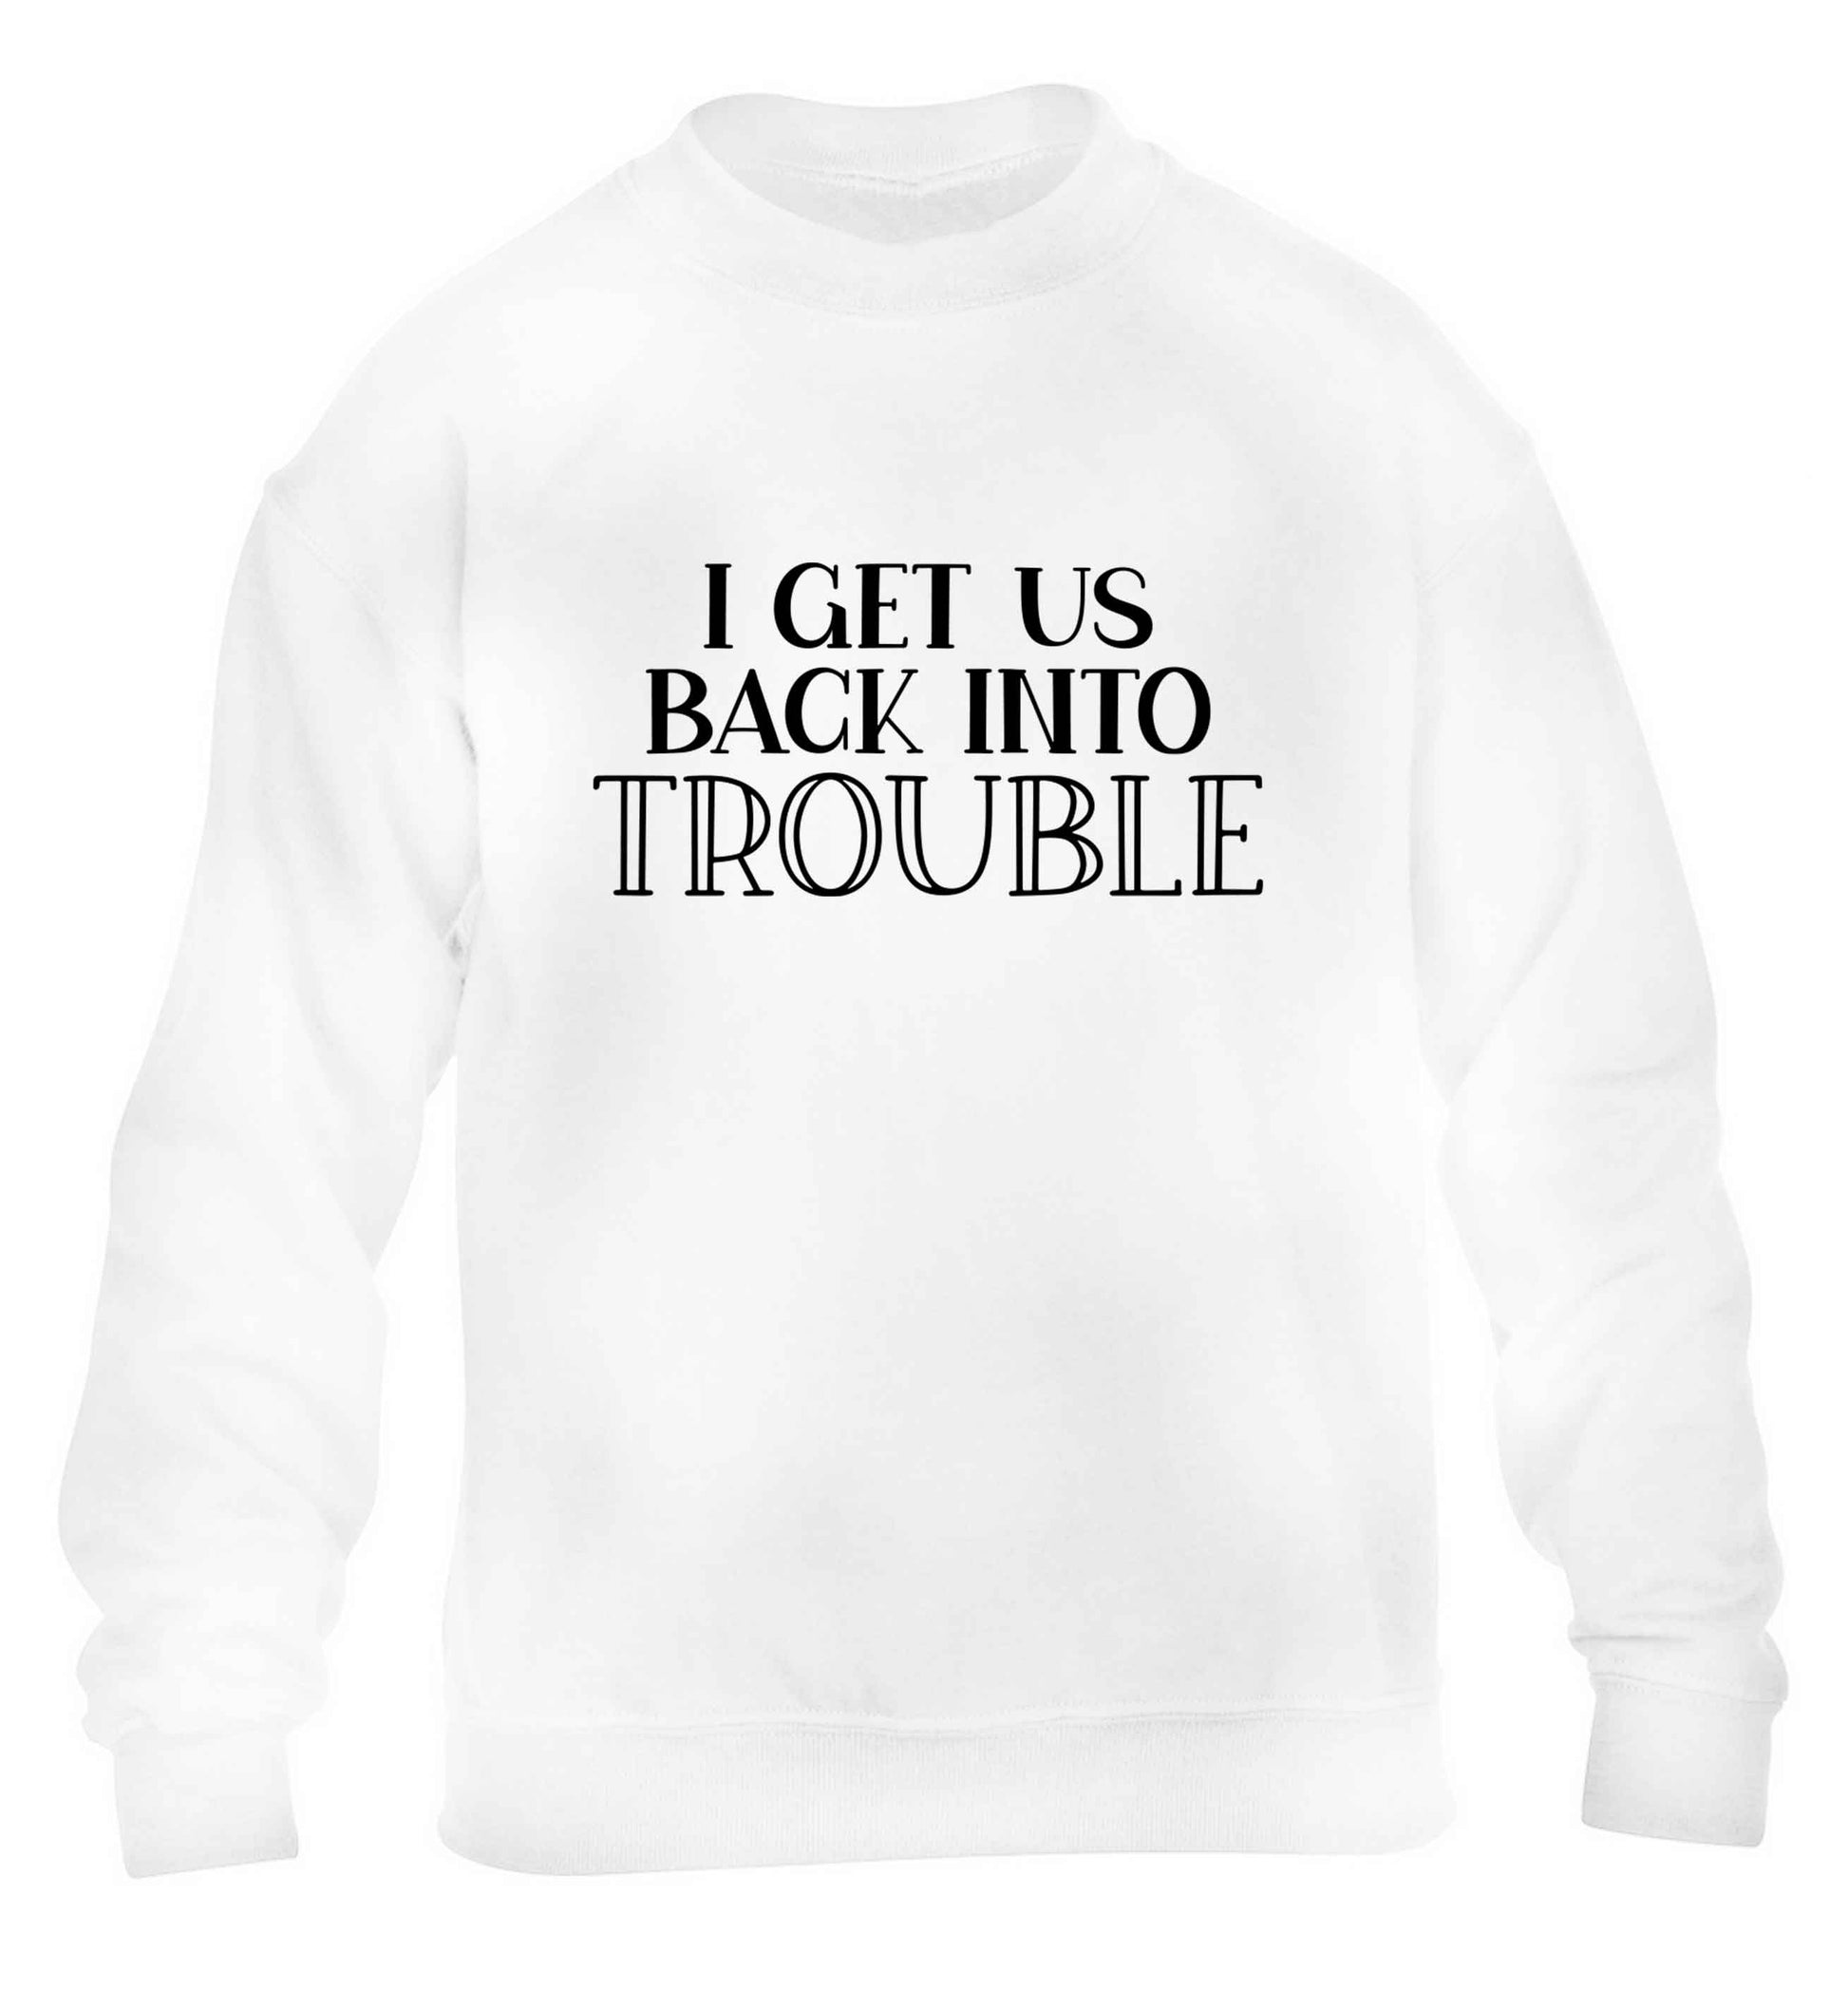 I get us back into trouble children's white sweater 12-13 Years